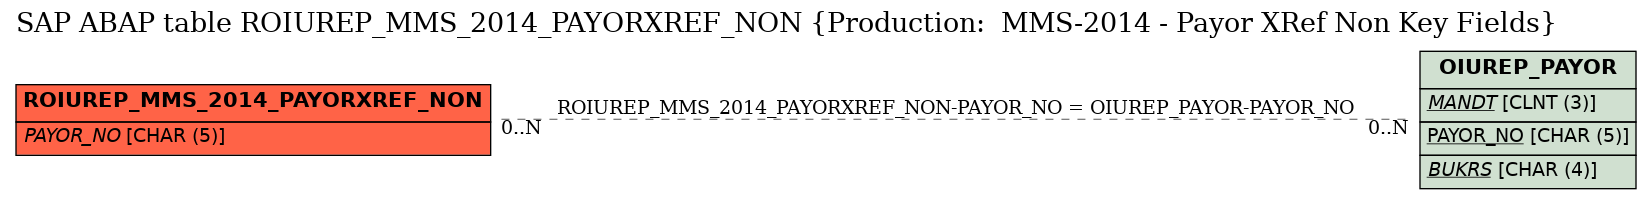 E-R Diagram for table ROIUREP_MMS_2014_PAYORXREF_NON (Production:  MMS-2014 - Payor XRef Non Key Fields)